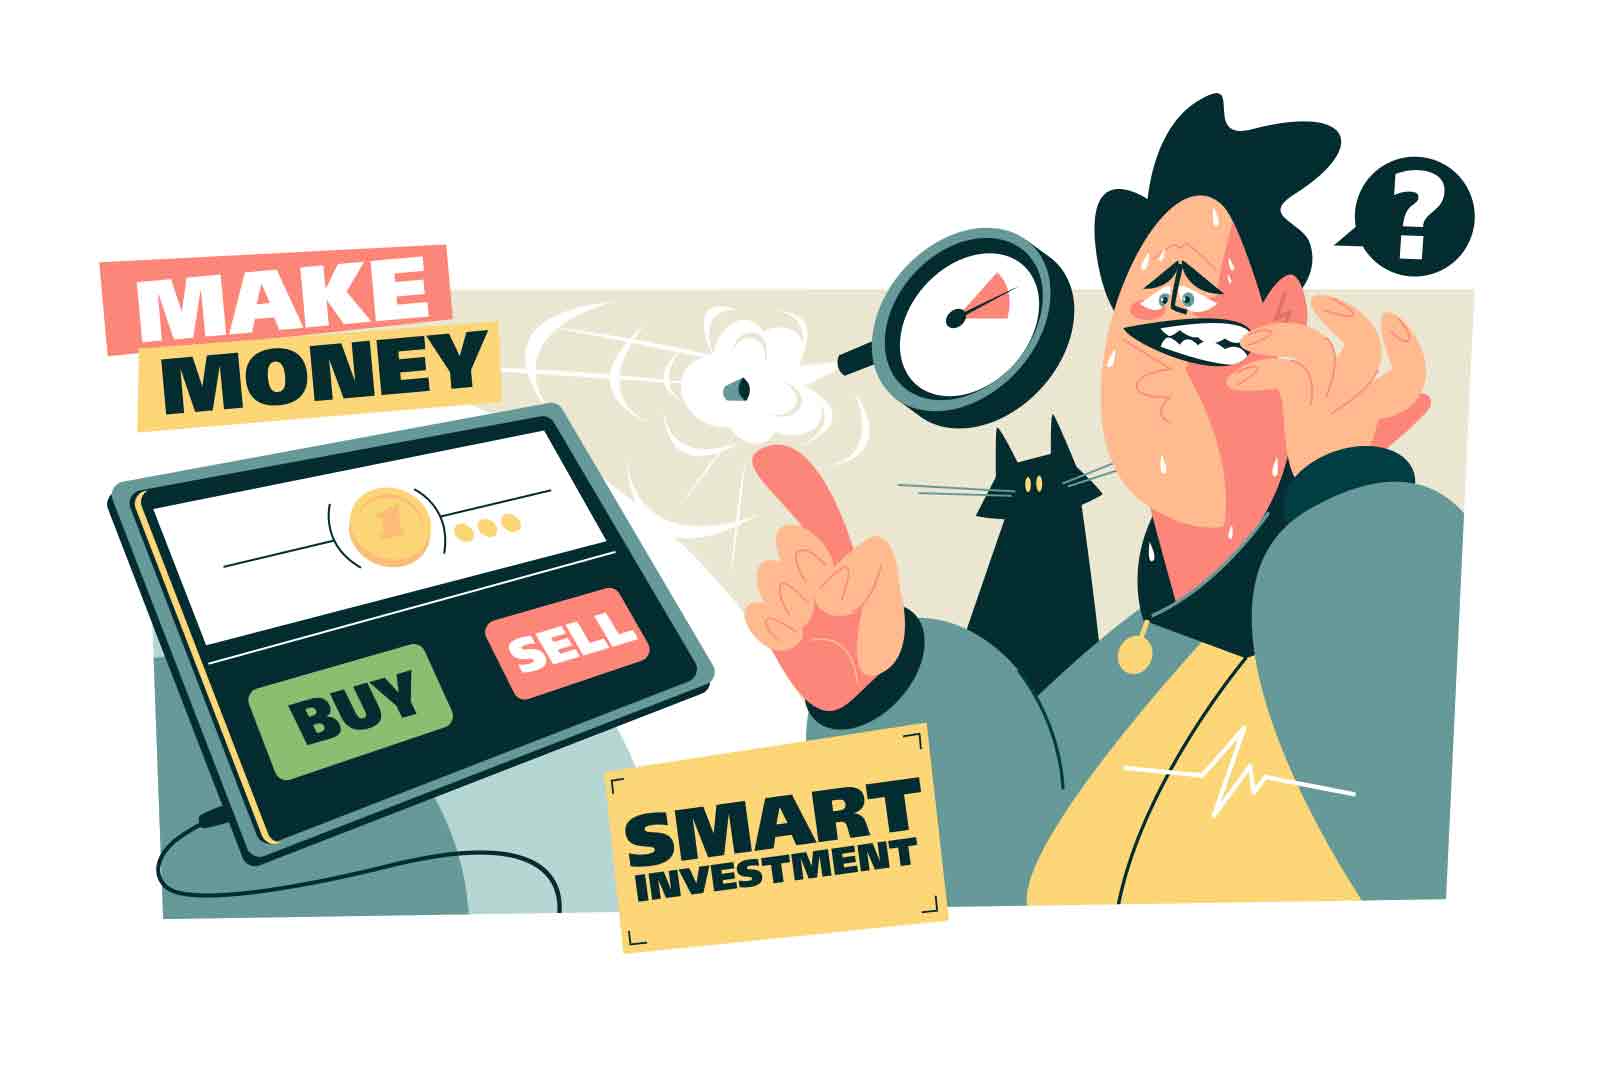 Financial trading and smart investment, make money buy or sell vector illustration. Stock market investment flat style concept